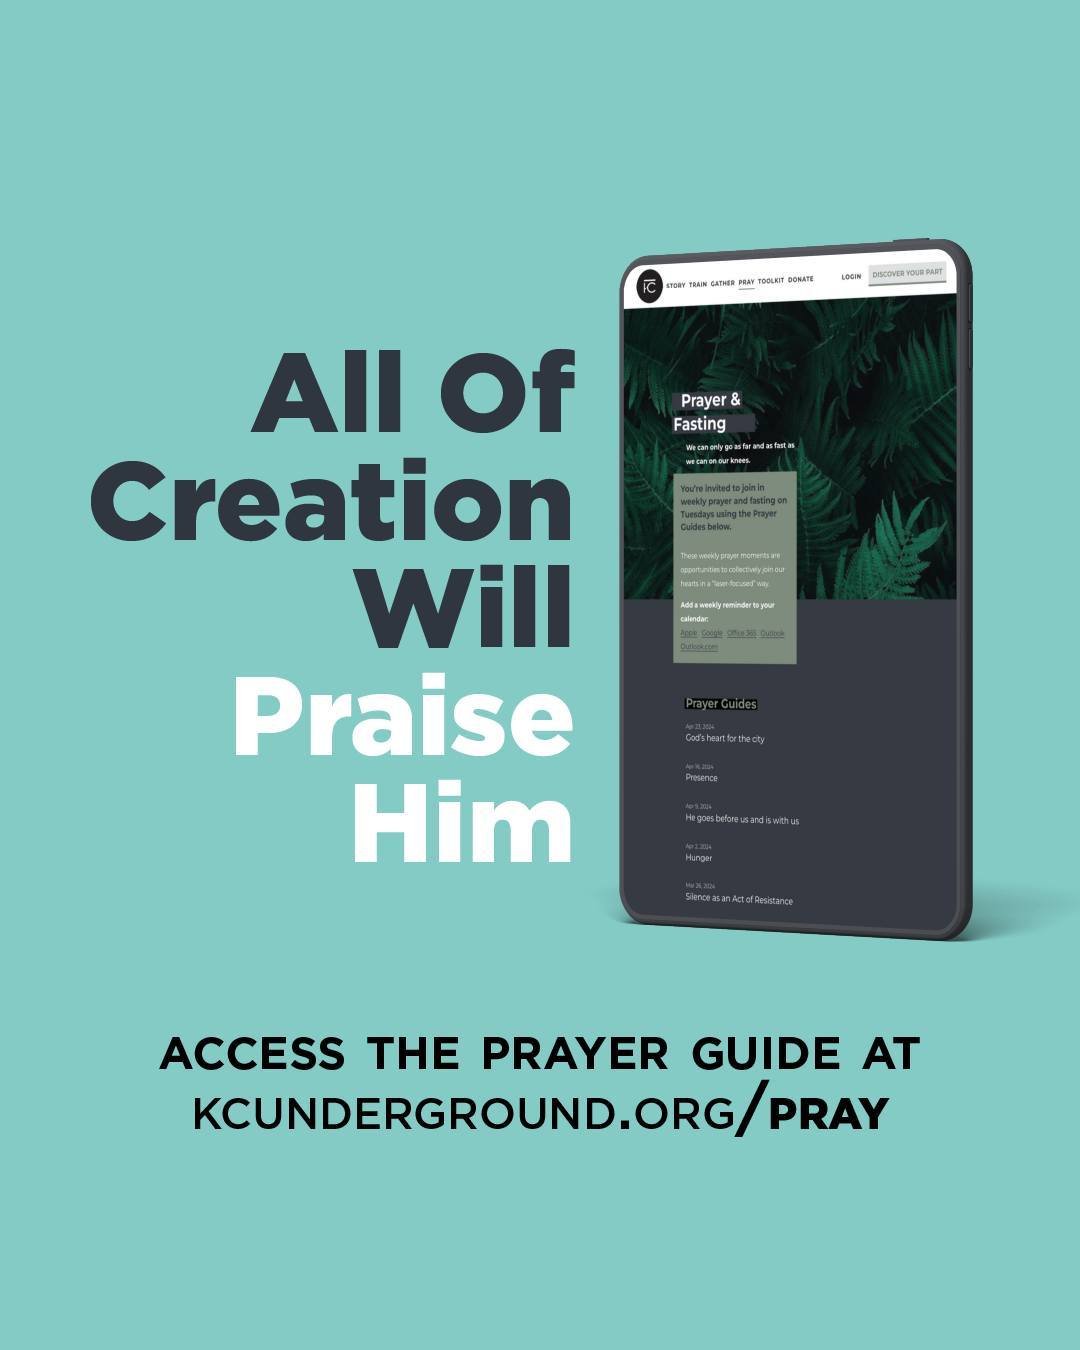 On Tuesdays, we release a prayer guide, hoping that we will collectively join our hearts through prayer in a &ldquo;laser-focused&rdquo; way.

Today, as the Underground, we come together around the Prayer Focus: All of creation will praise Him. 

Lin